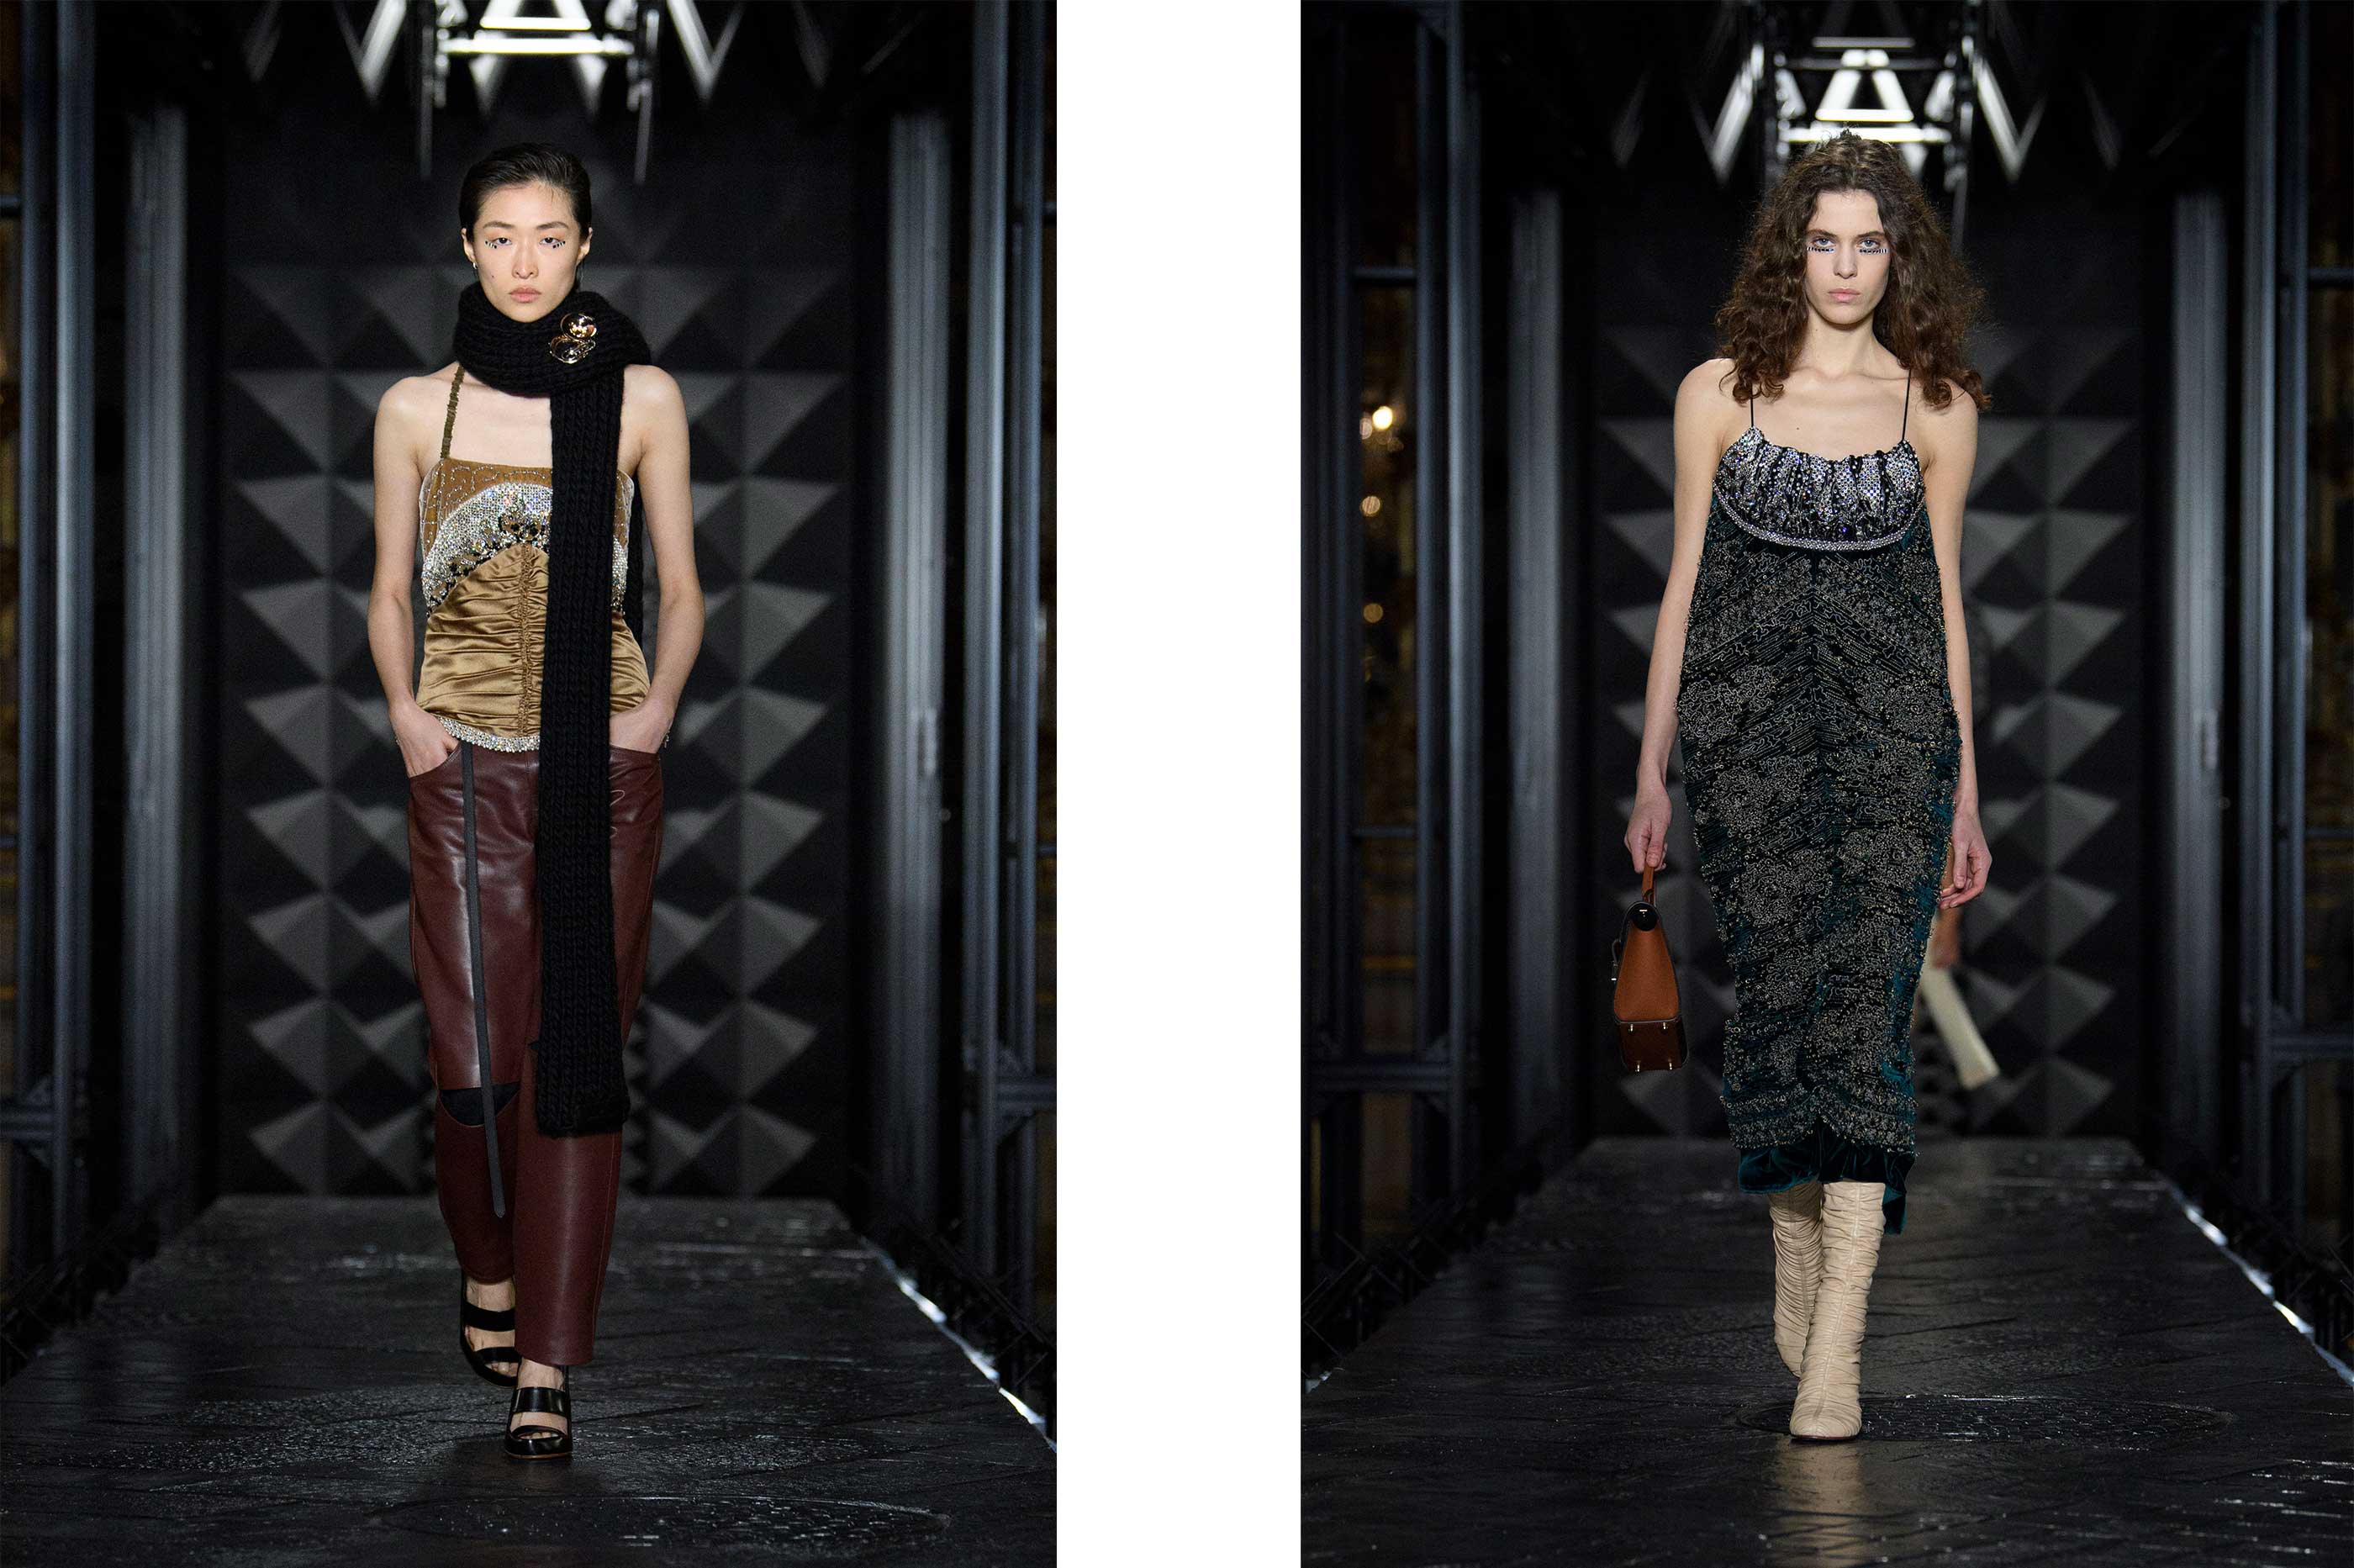 BREAKING NEWS: Speculation Swirling Around Louis Vuitton Possibly